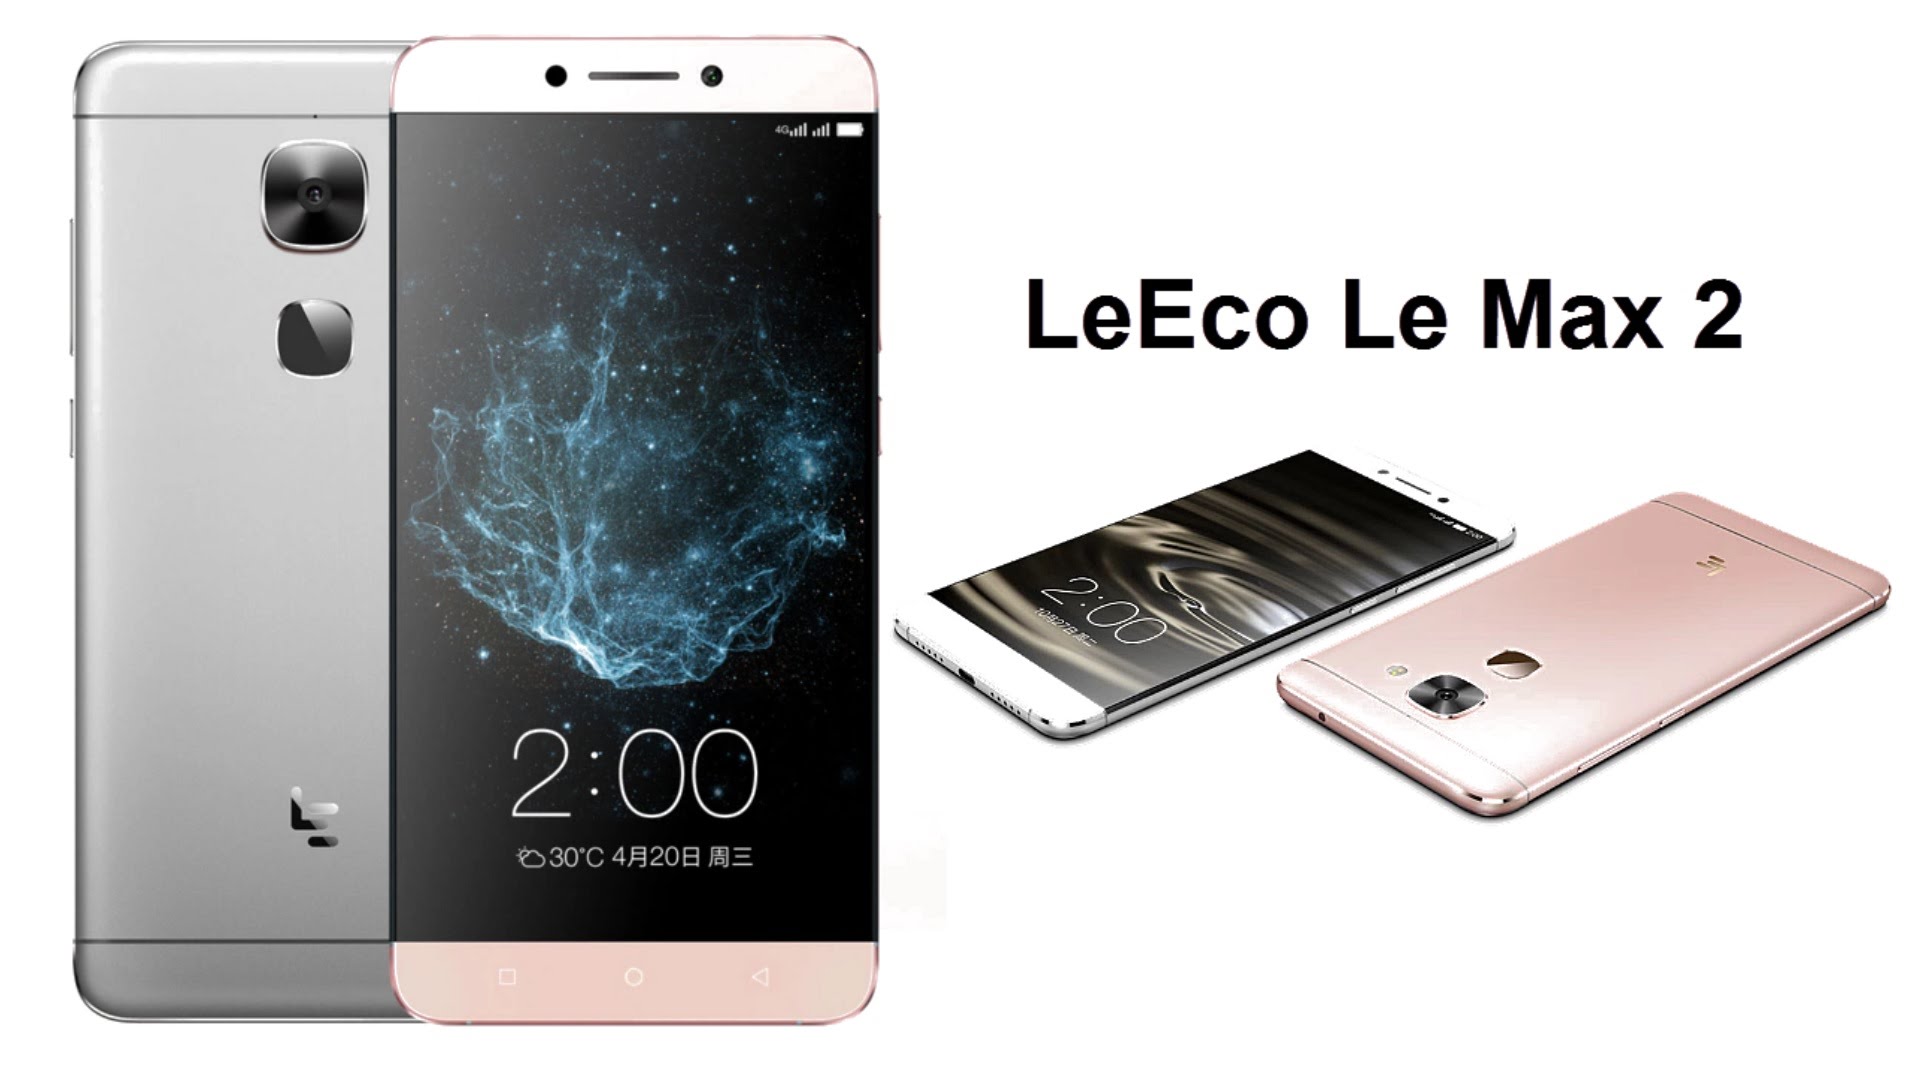 How to Install Official TWRP Recovery on LeEco Le Max 2 and Root it